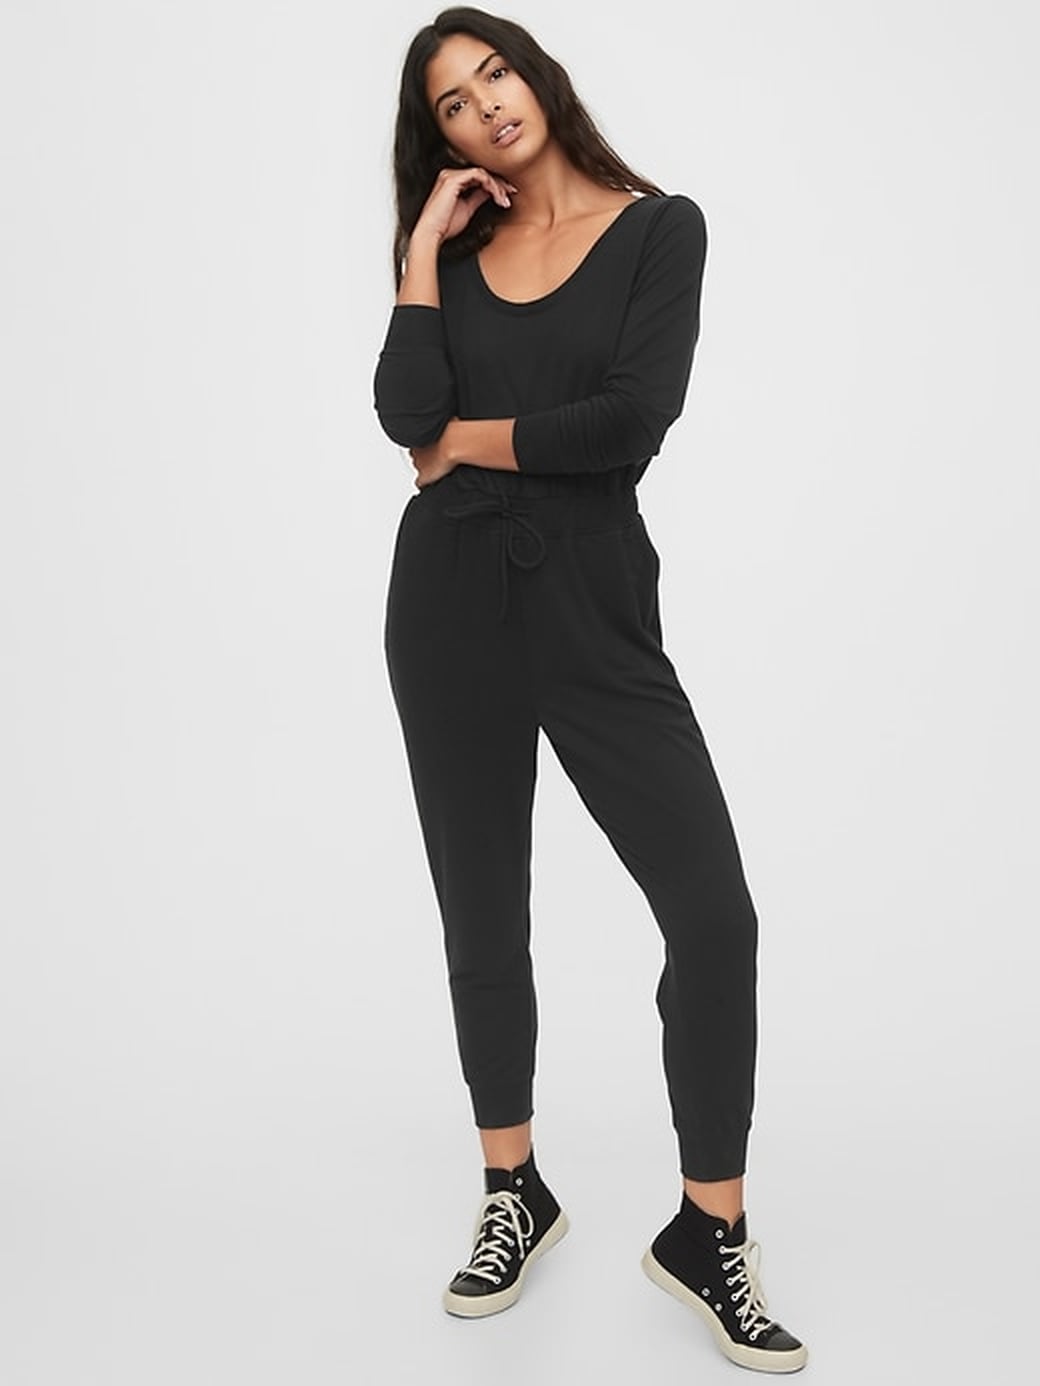 Best Jumpsuits and Rompers From Gap 2021 | POPSUGAR Fashion